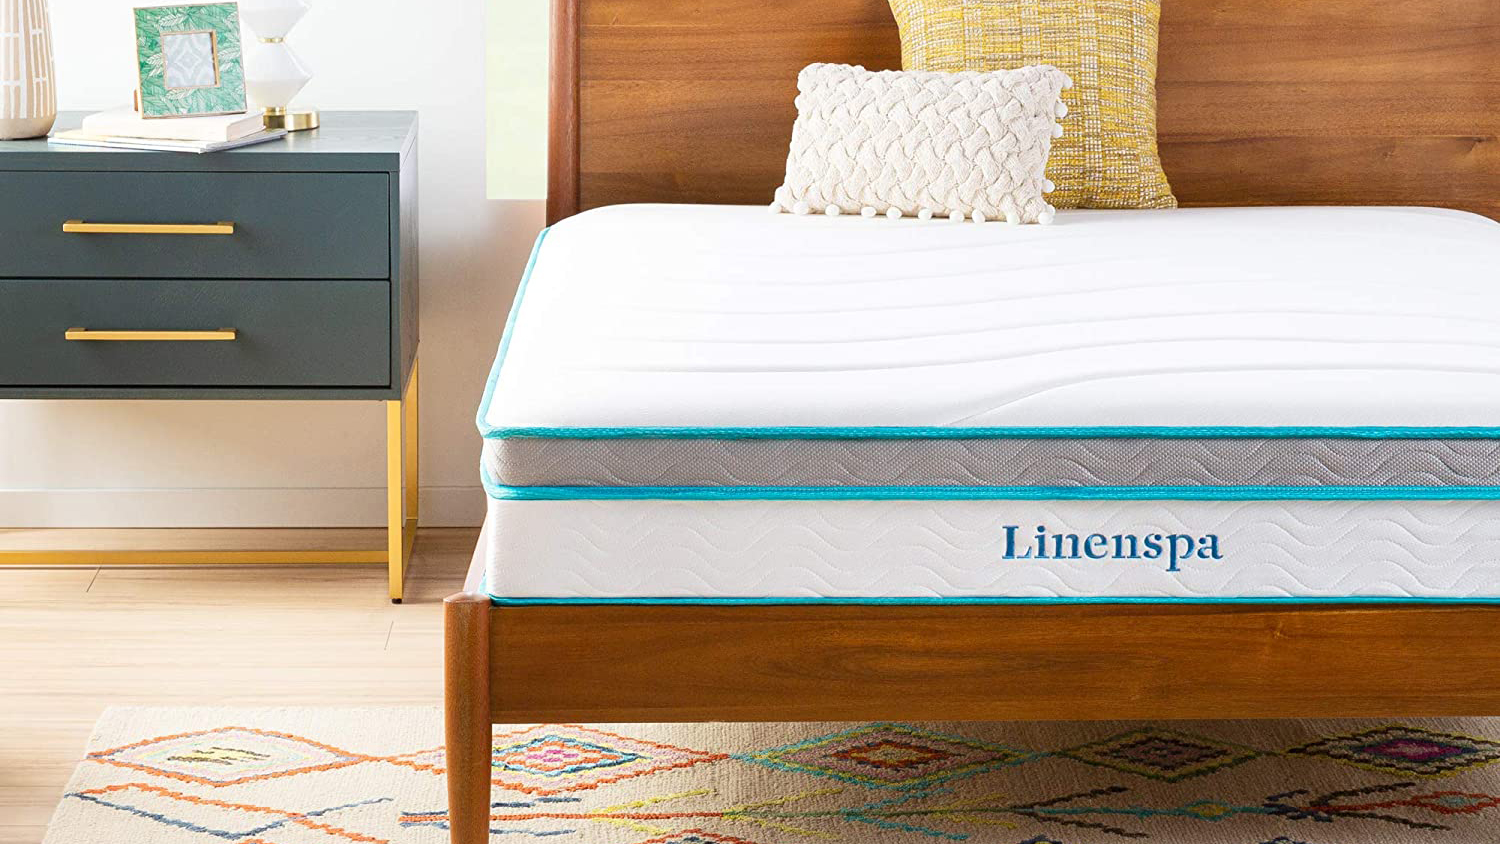 A crop of the Linenspa mattress on a wooden frame in a bedroom scene